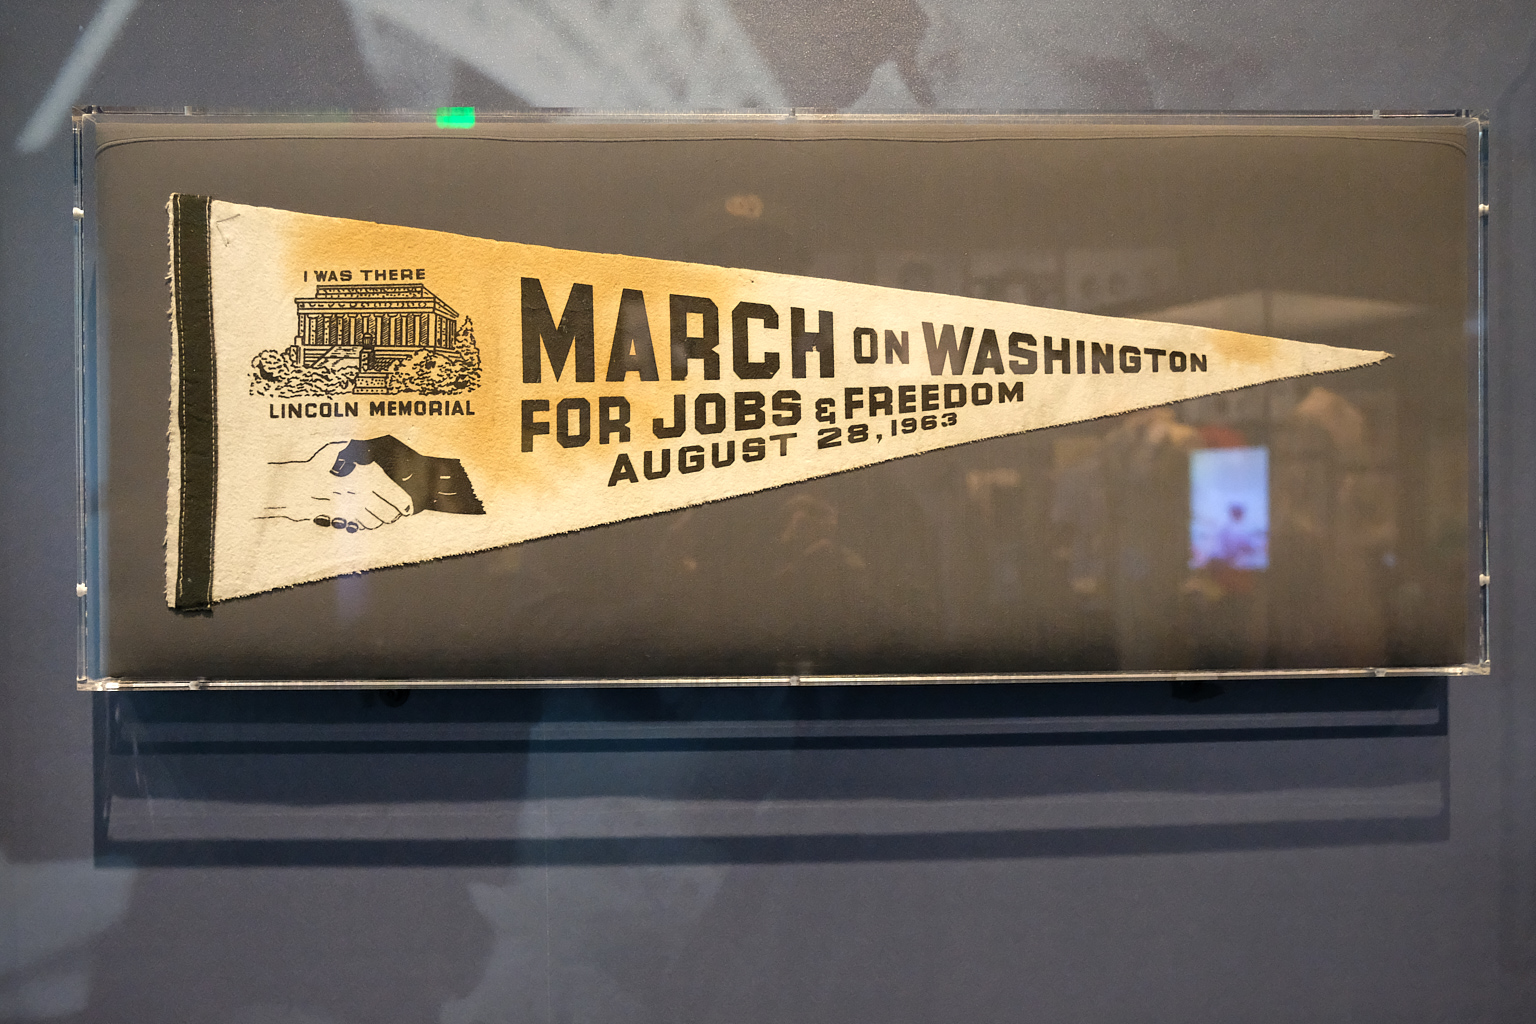  Pennant from the March on Washington for Jobs and Freedom in 1963. Twelve-year-old Edith Lee-Payne traveled from Detroit, Michigan with her mother to attend the march. She saved this pennant as a cherished memento of the historic event. 